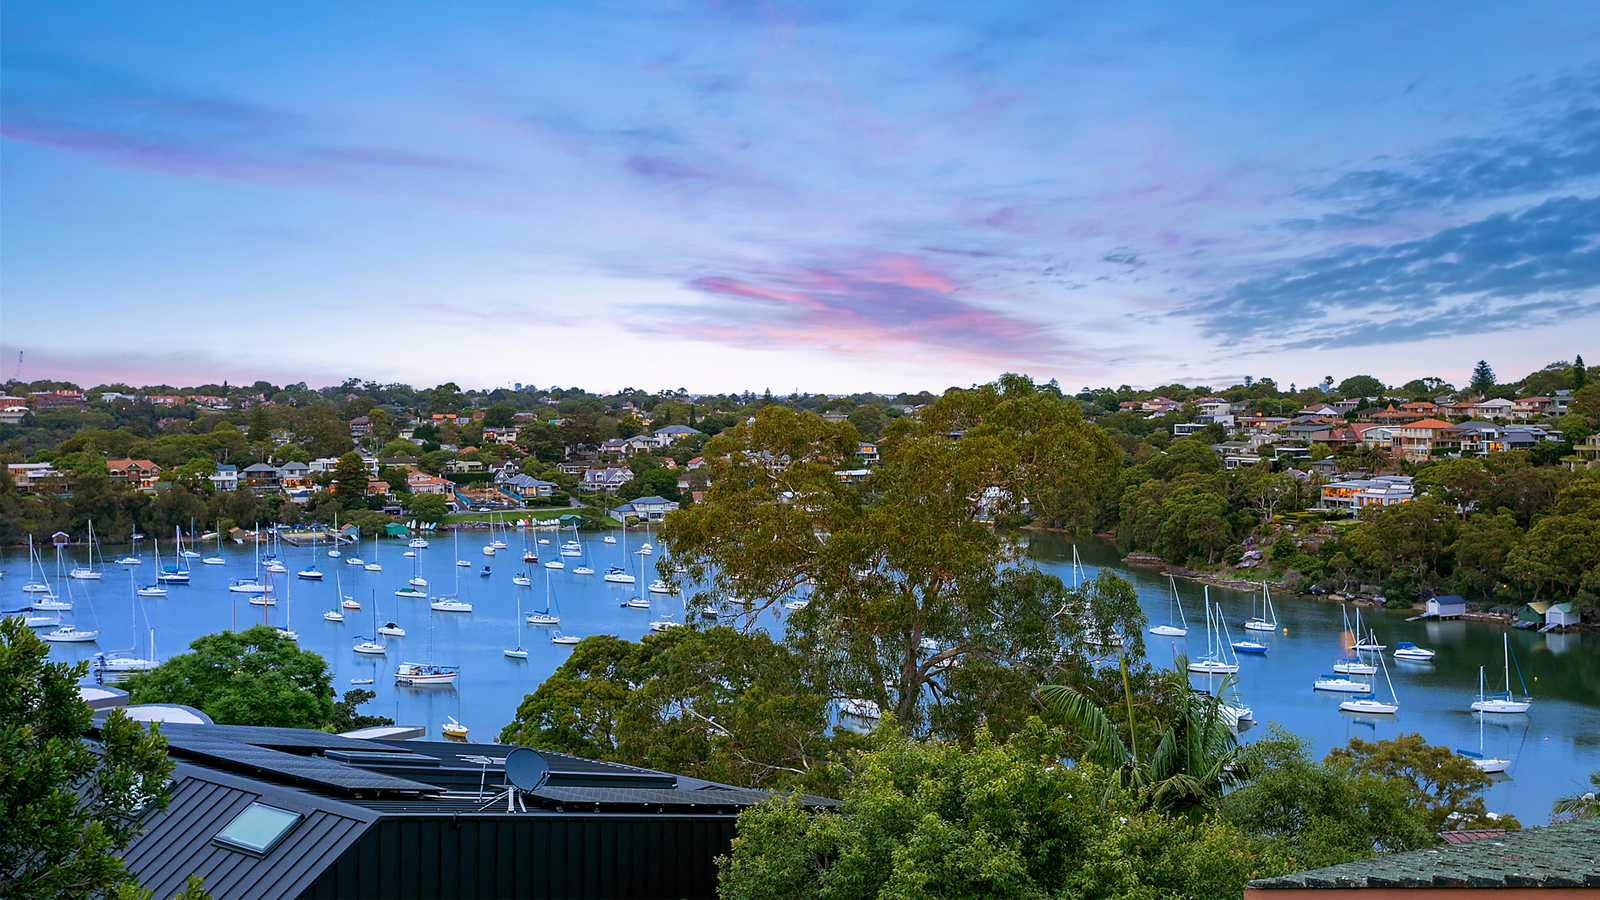 Sydney’s Top 10 Suburbs Are All Coastal, Except One